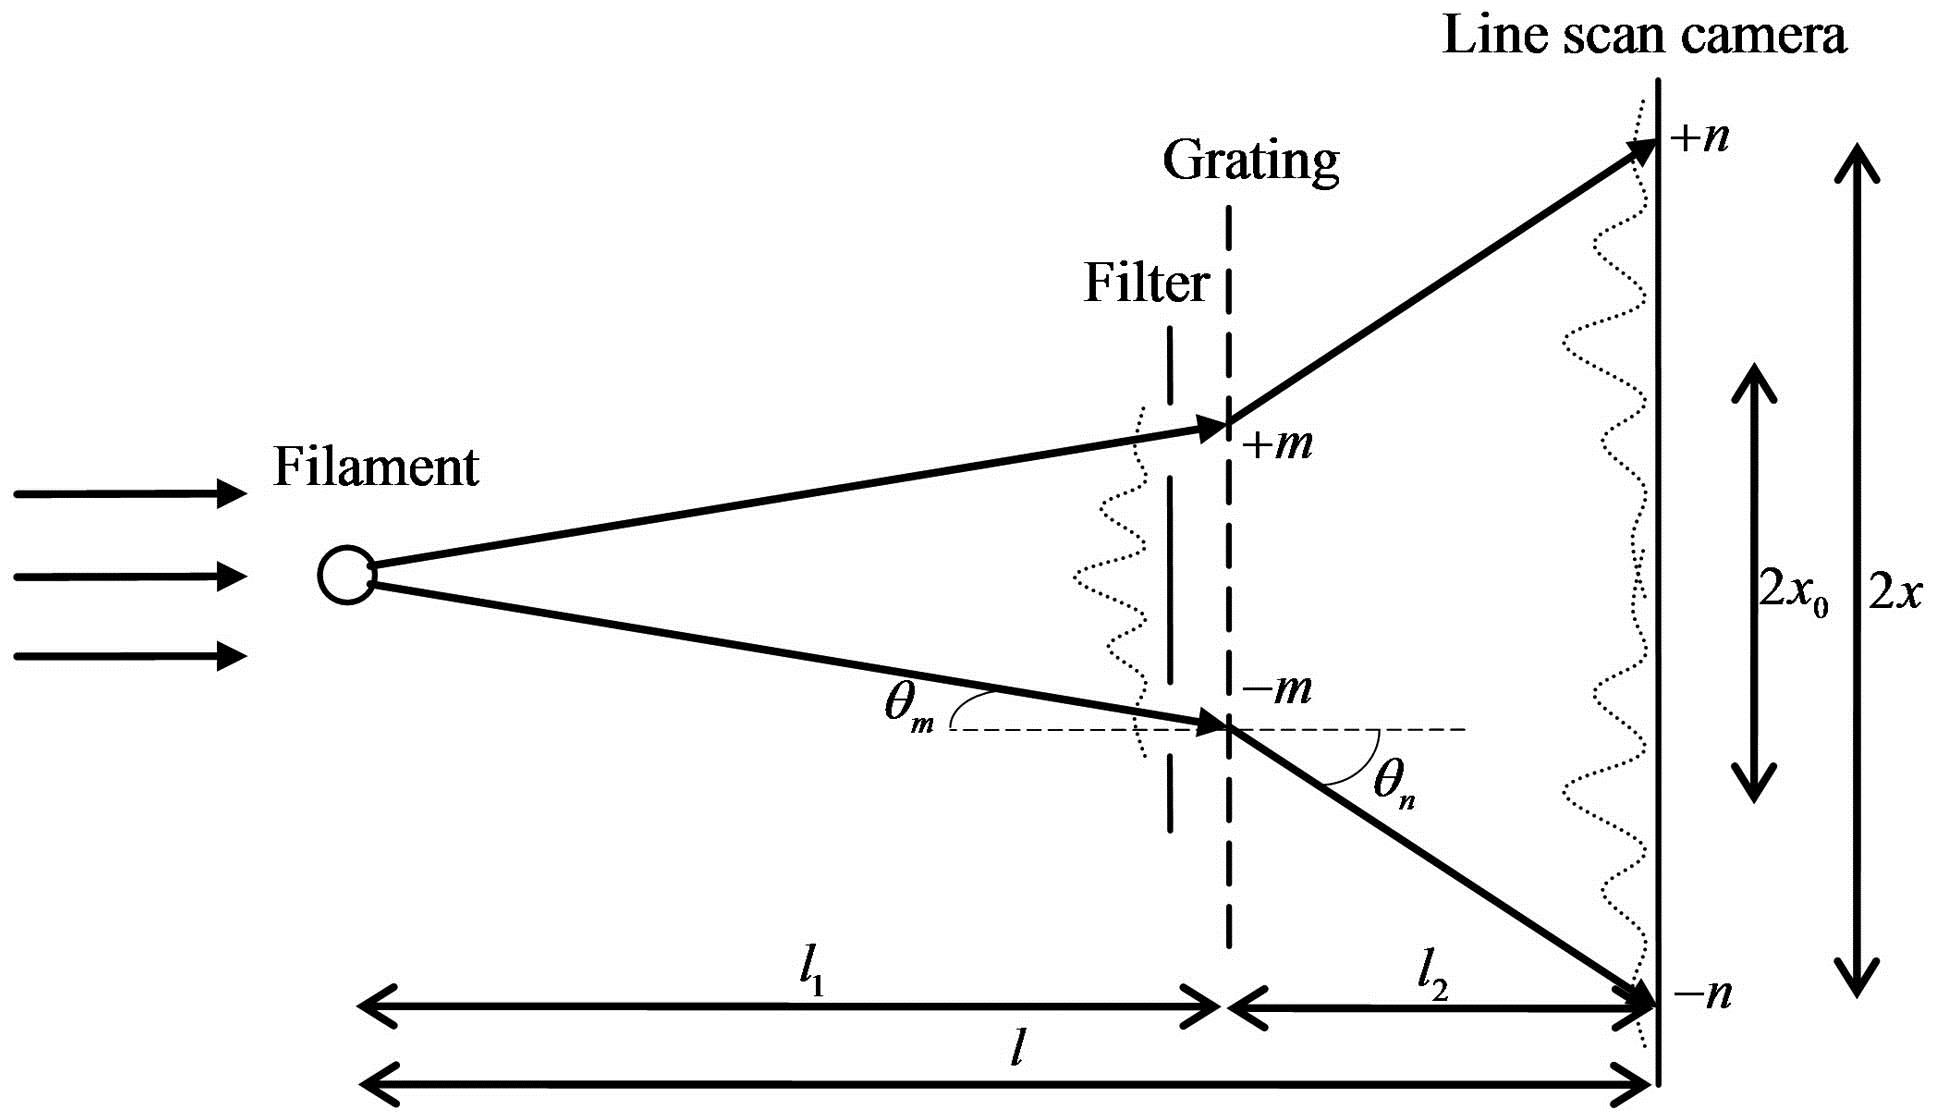 Filament diameter measurement system based on dual diffraction (it reverts back to a traditional diffraction system if the filter and the grating are removed).